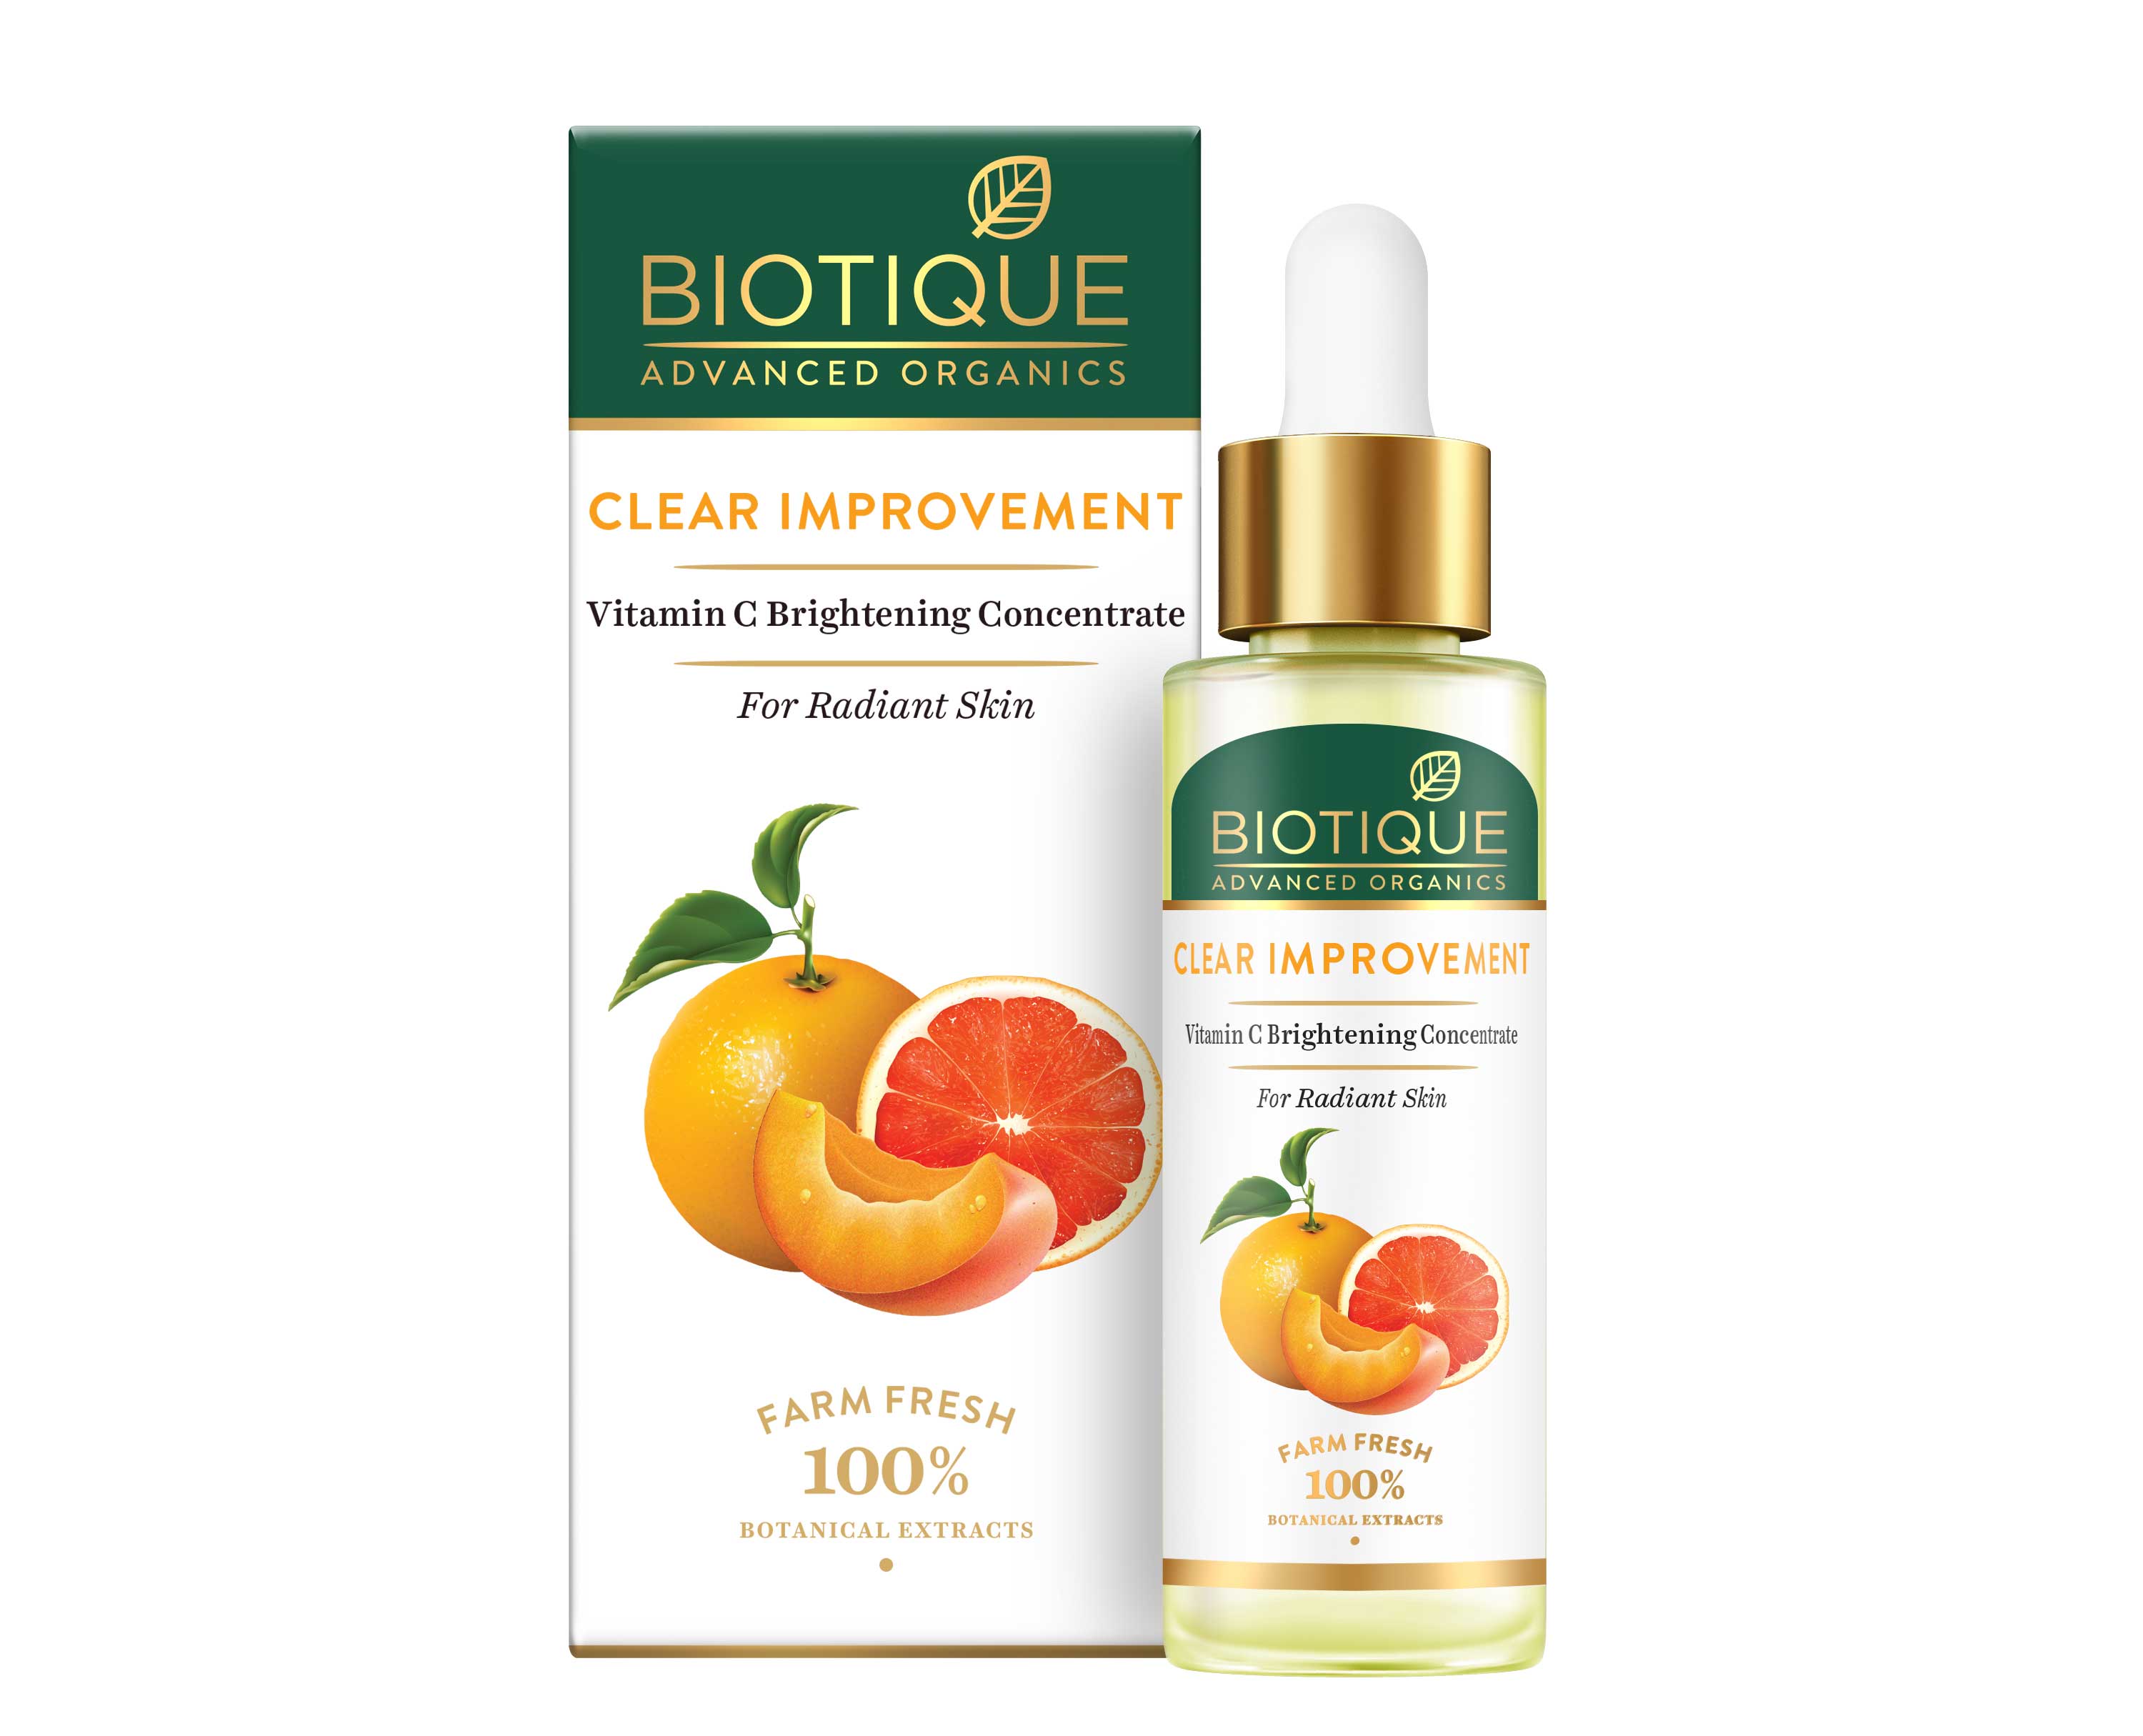 CLEAR IMPROVEMENT Vitamin C Brightening Concentrate